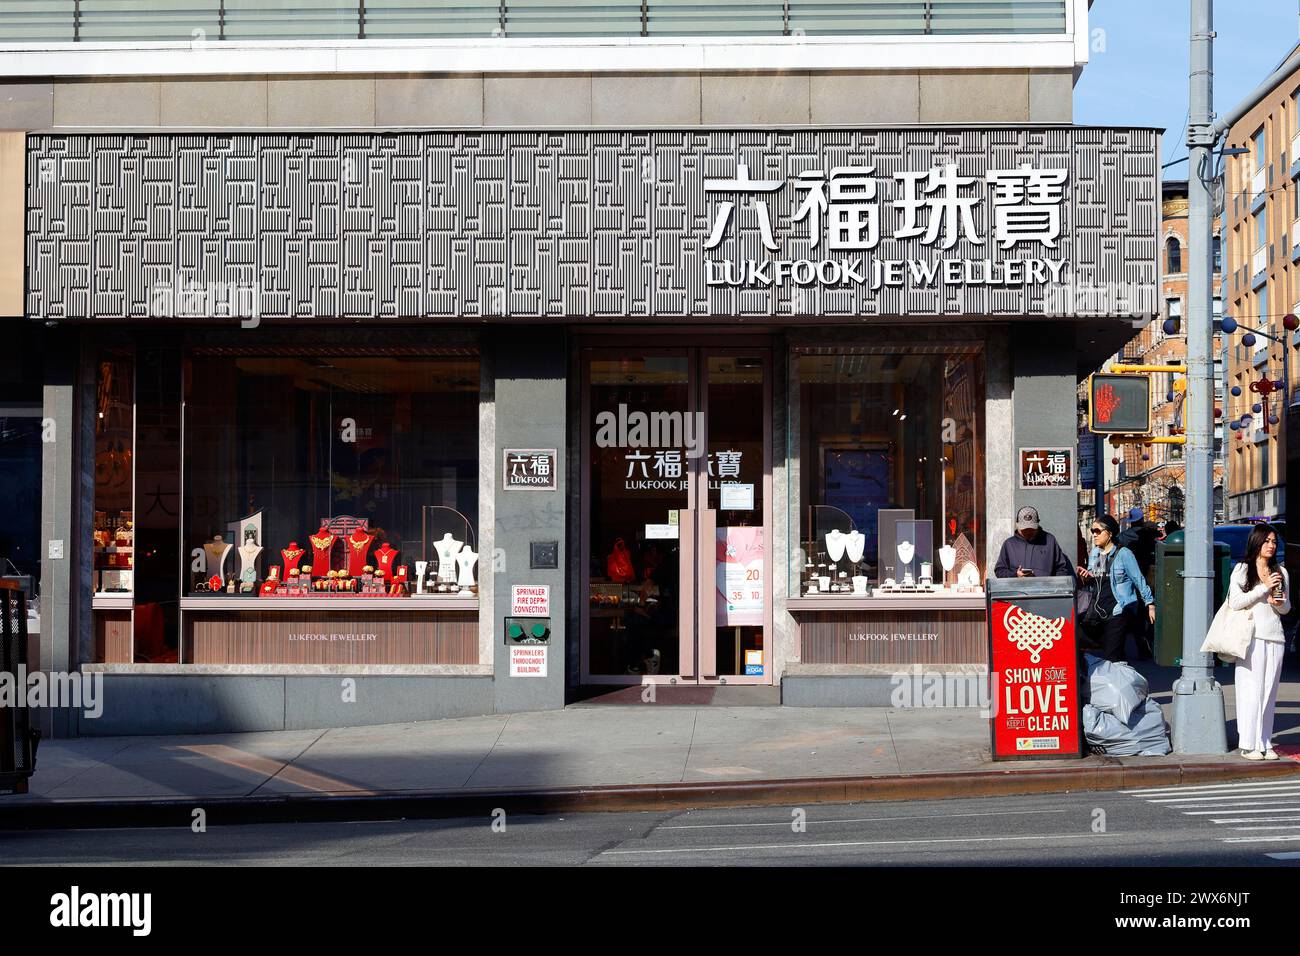 Lukfook Jewellery 六福珠寶, 185 Canal St, New York, NYC storefront of a jewelry store chain in Manhattan Chinatown. 紐約 Stock Photo